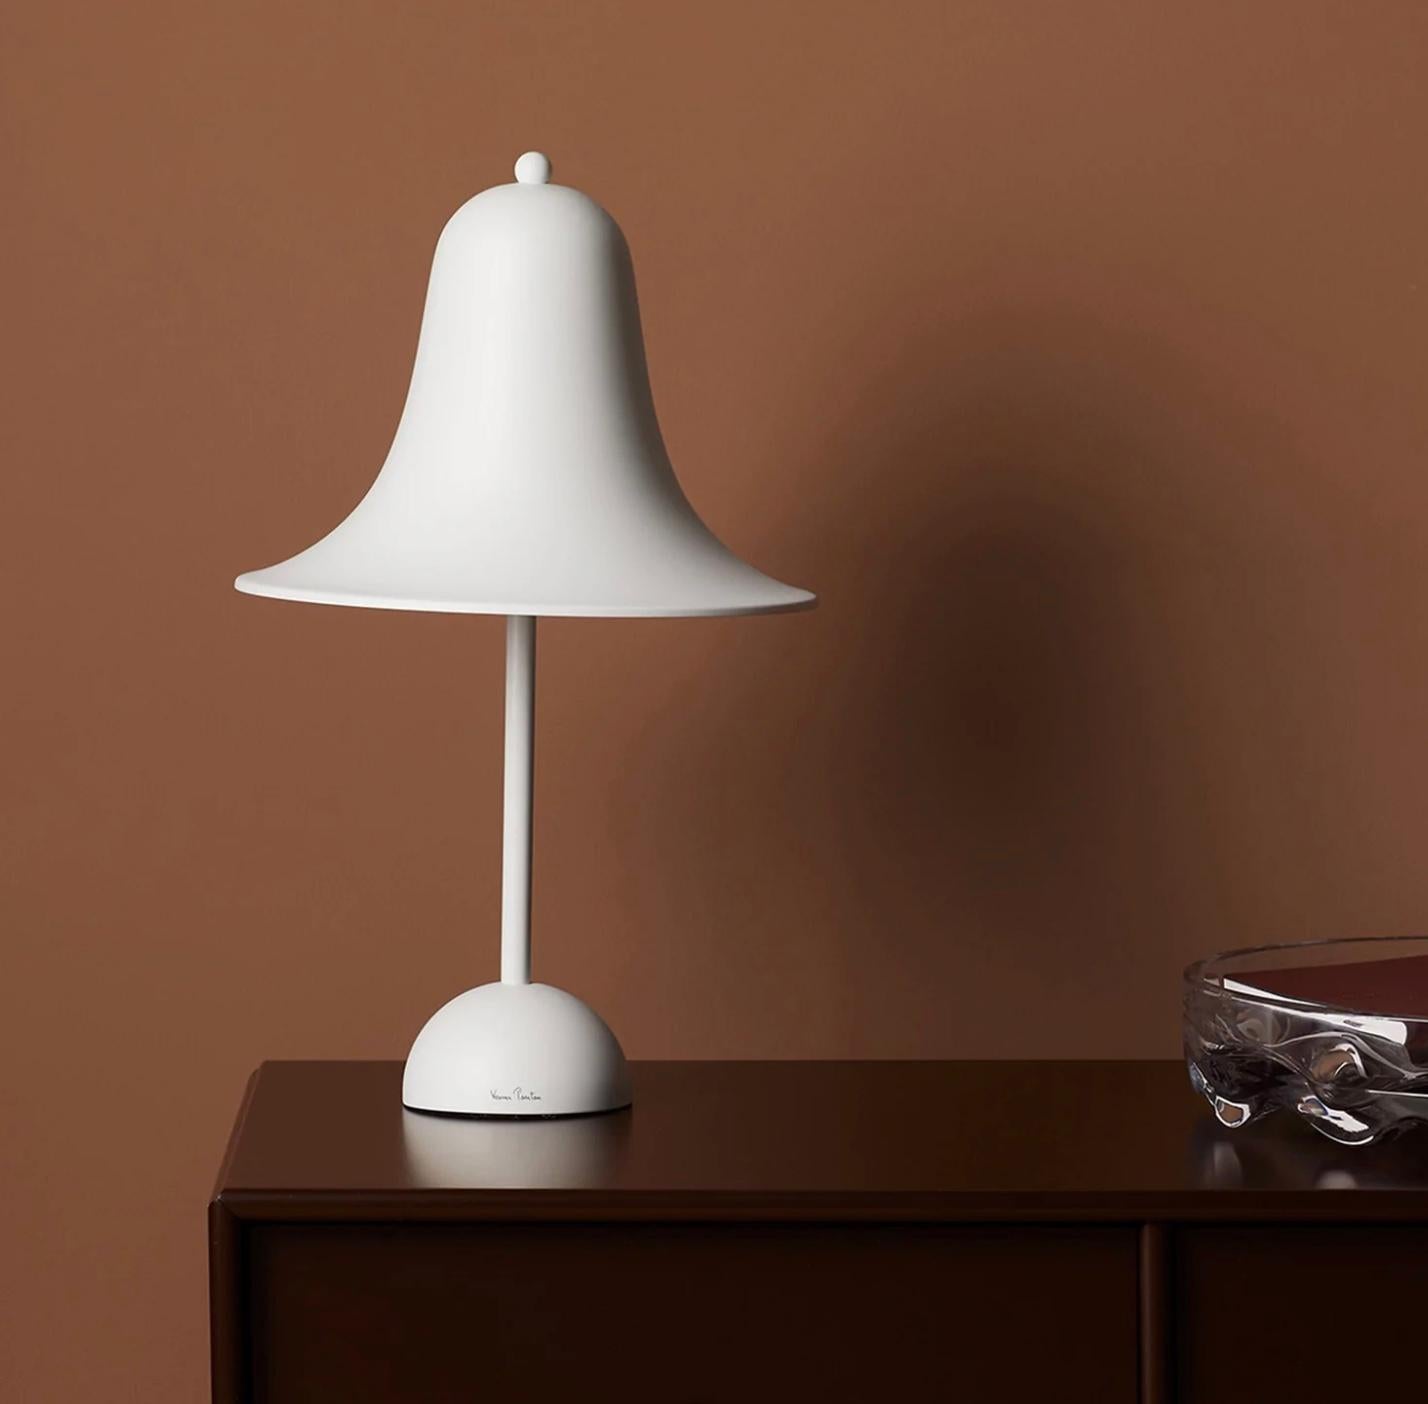 Verner Panton 'Pantop' table lamp in 'Matt White' for Verpan. Designed in 1980. New, current production.

The elegant Pantop line was designed by Verner Panton in 1980, and has for a long time been a staple of the Verpan collection. Pantop is